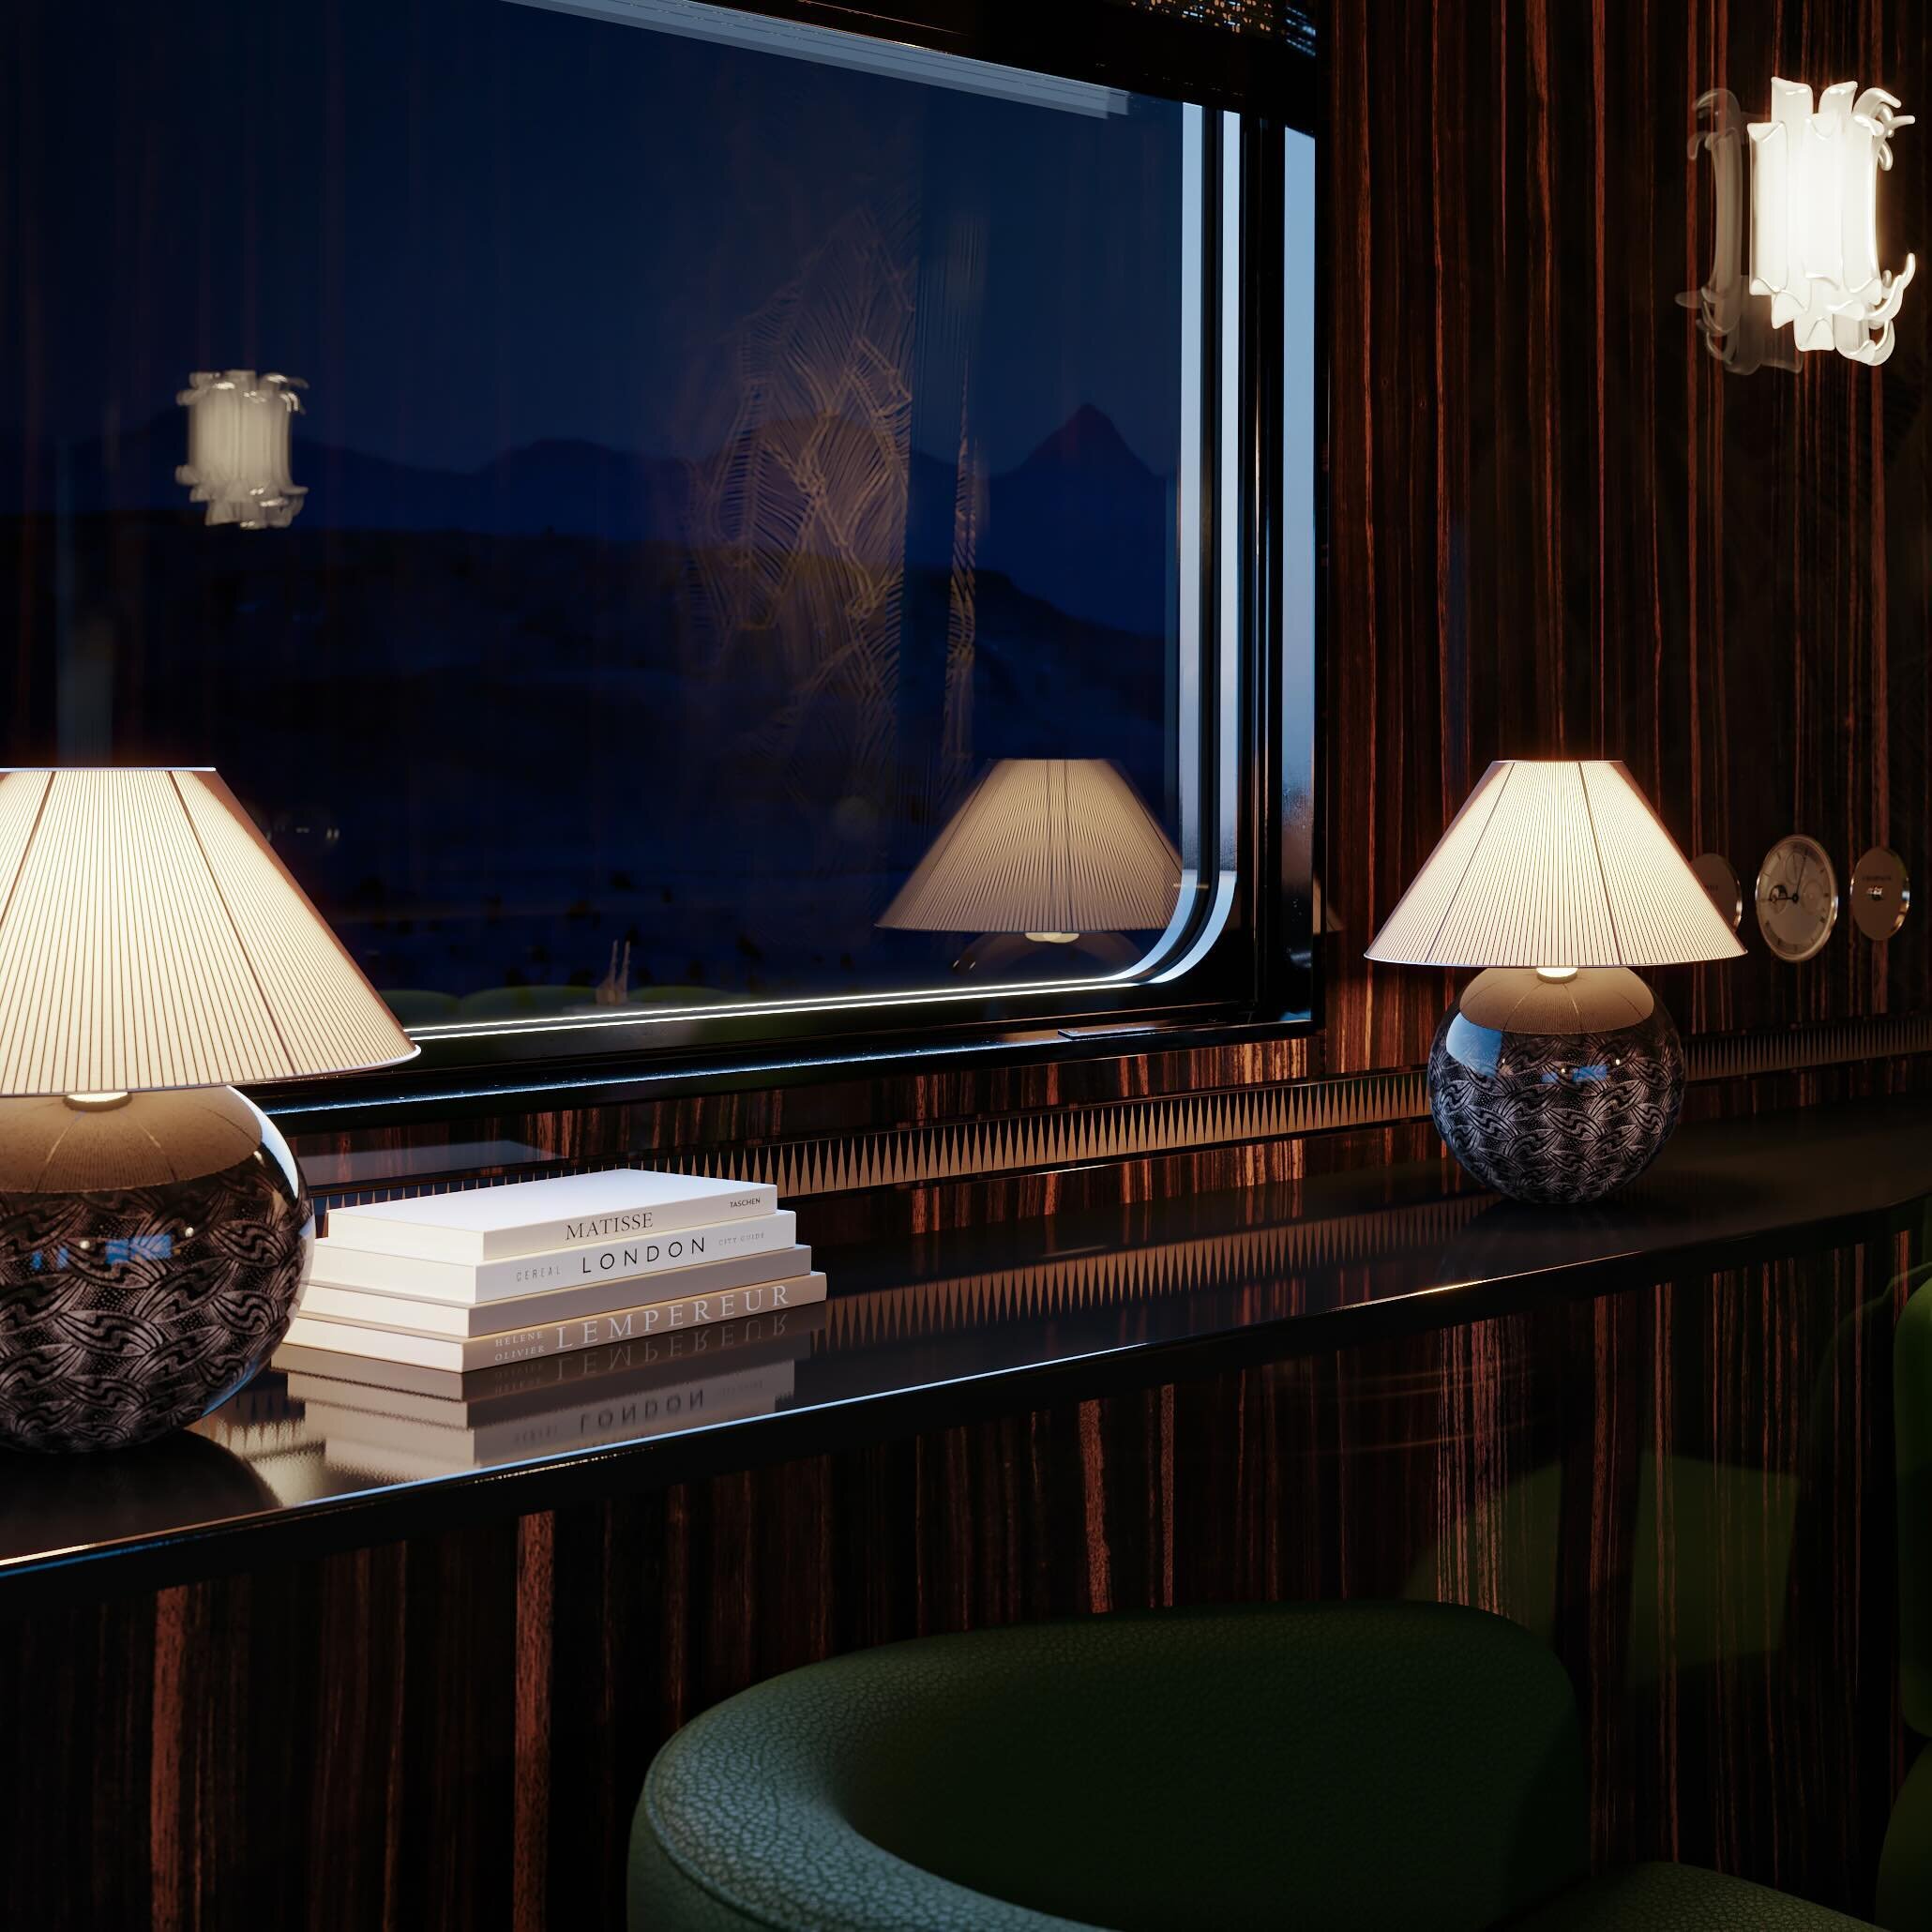 The art of travel, with the comfort of a luxury hotel

By @maximedangeac for @orientexpress 

#train #orientexpress #cgi #landscape #hoteltravel